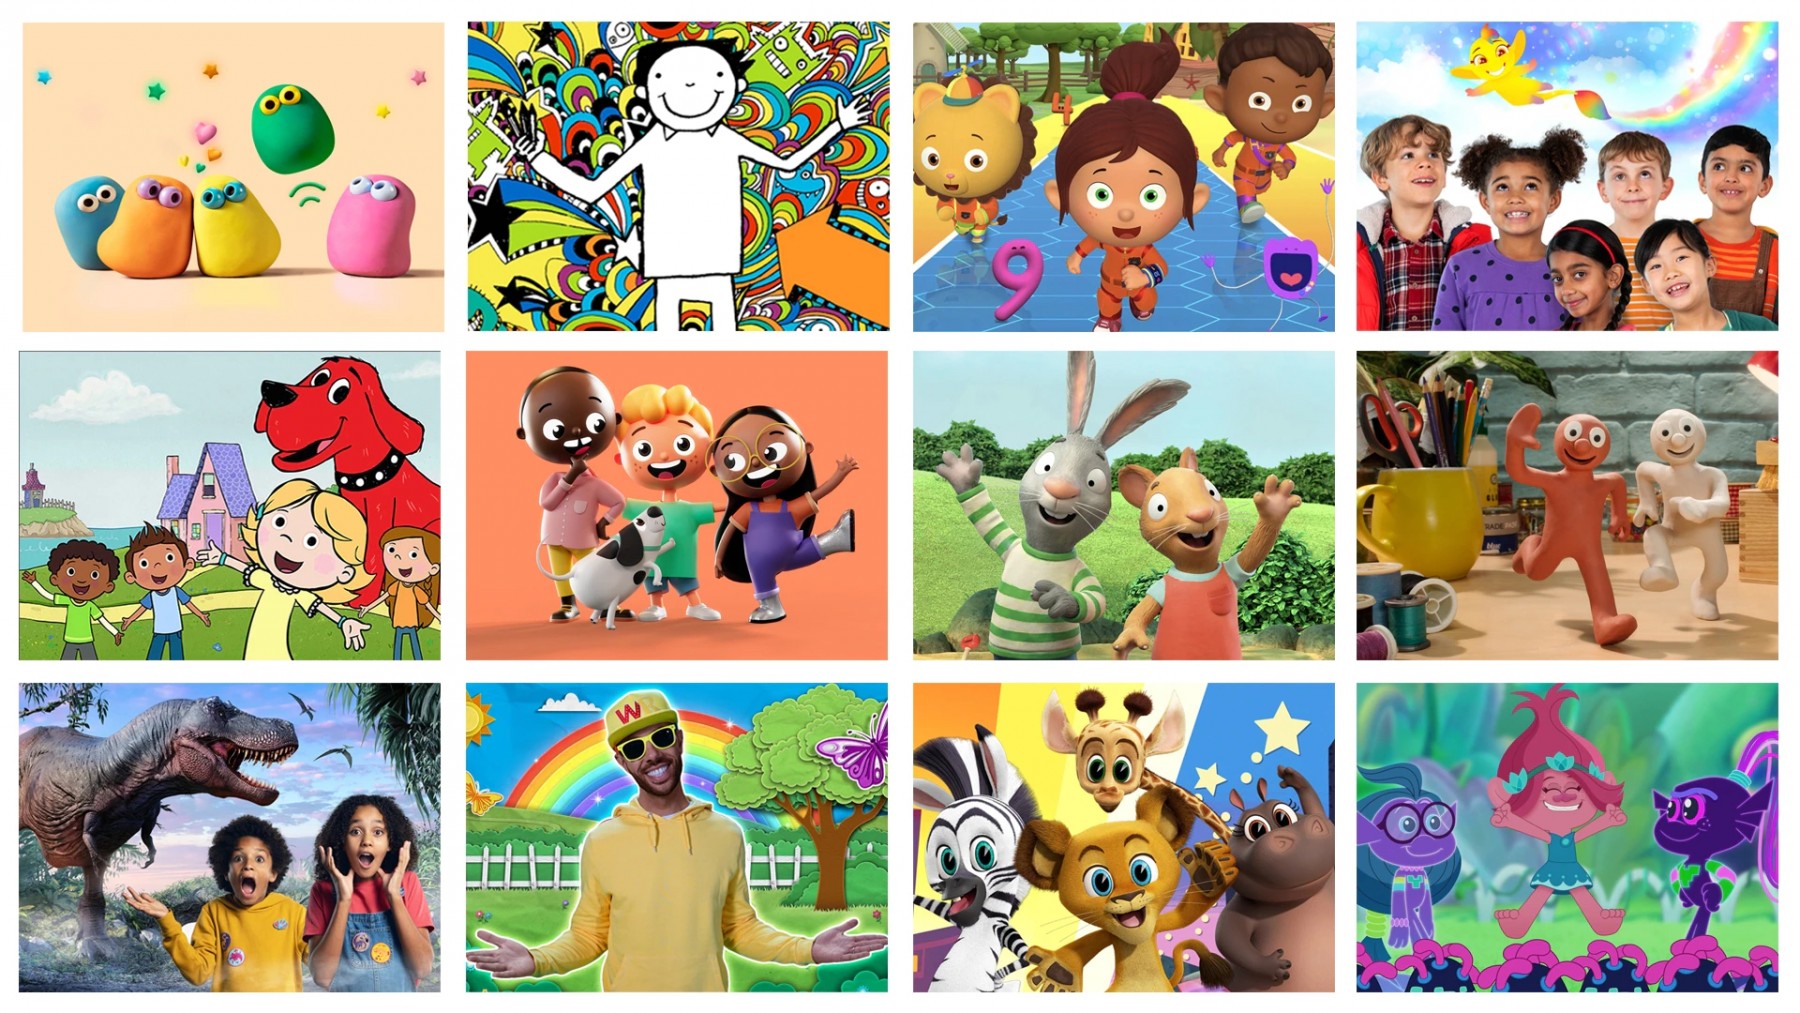 Sky to launch new 24-hour linear kids' TV channel Prolific North